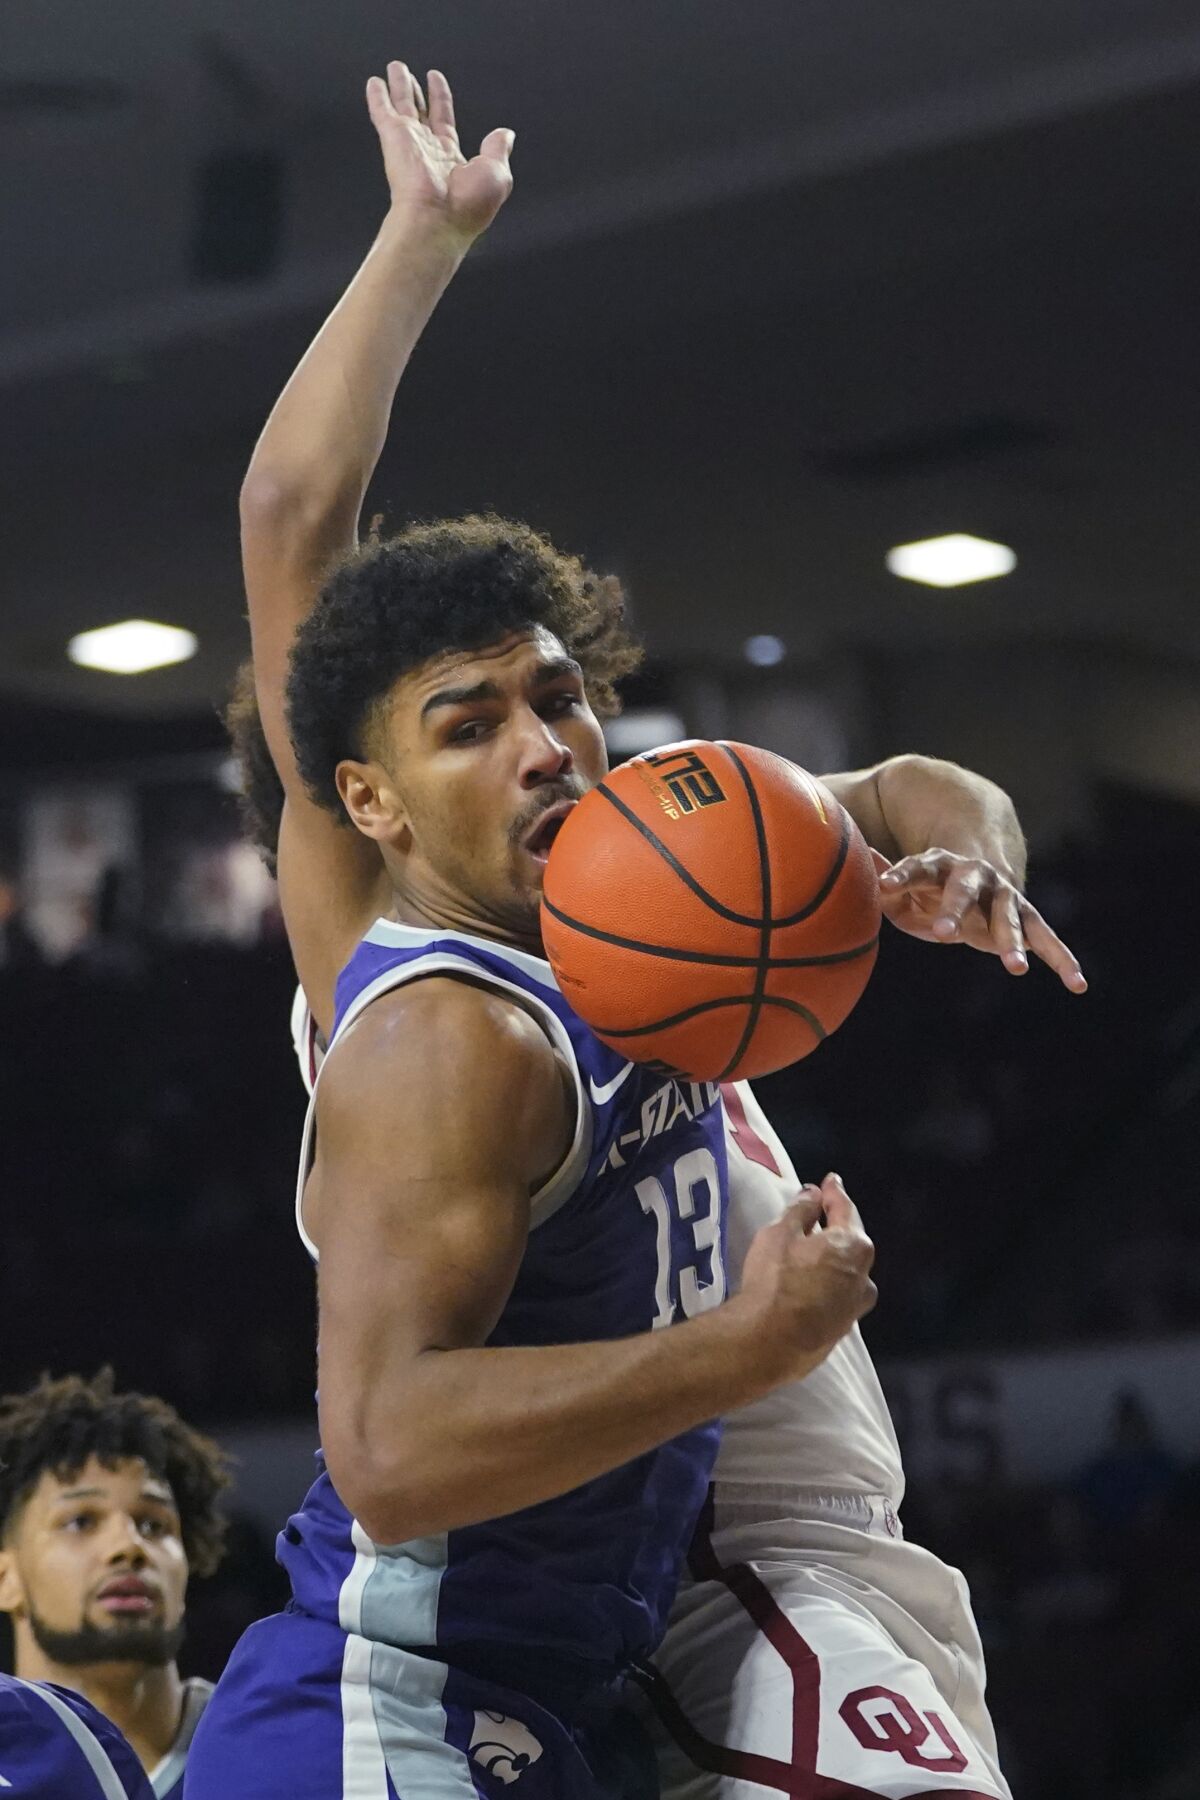 Kansas State guard Mark Smith (13) reaches for a rebound in front of Jalen Hill, rear, in the second half of an NCAA college basketball game Saturday, Jan. 1, 2022, in Norman, Okla. (AP Photo/Sue Ogrocki)